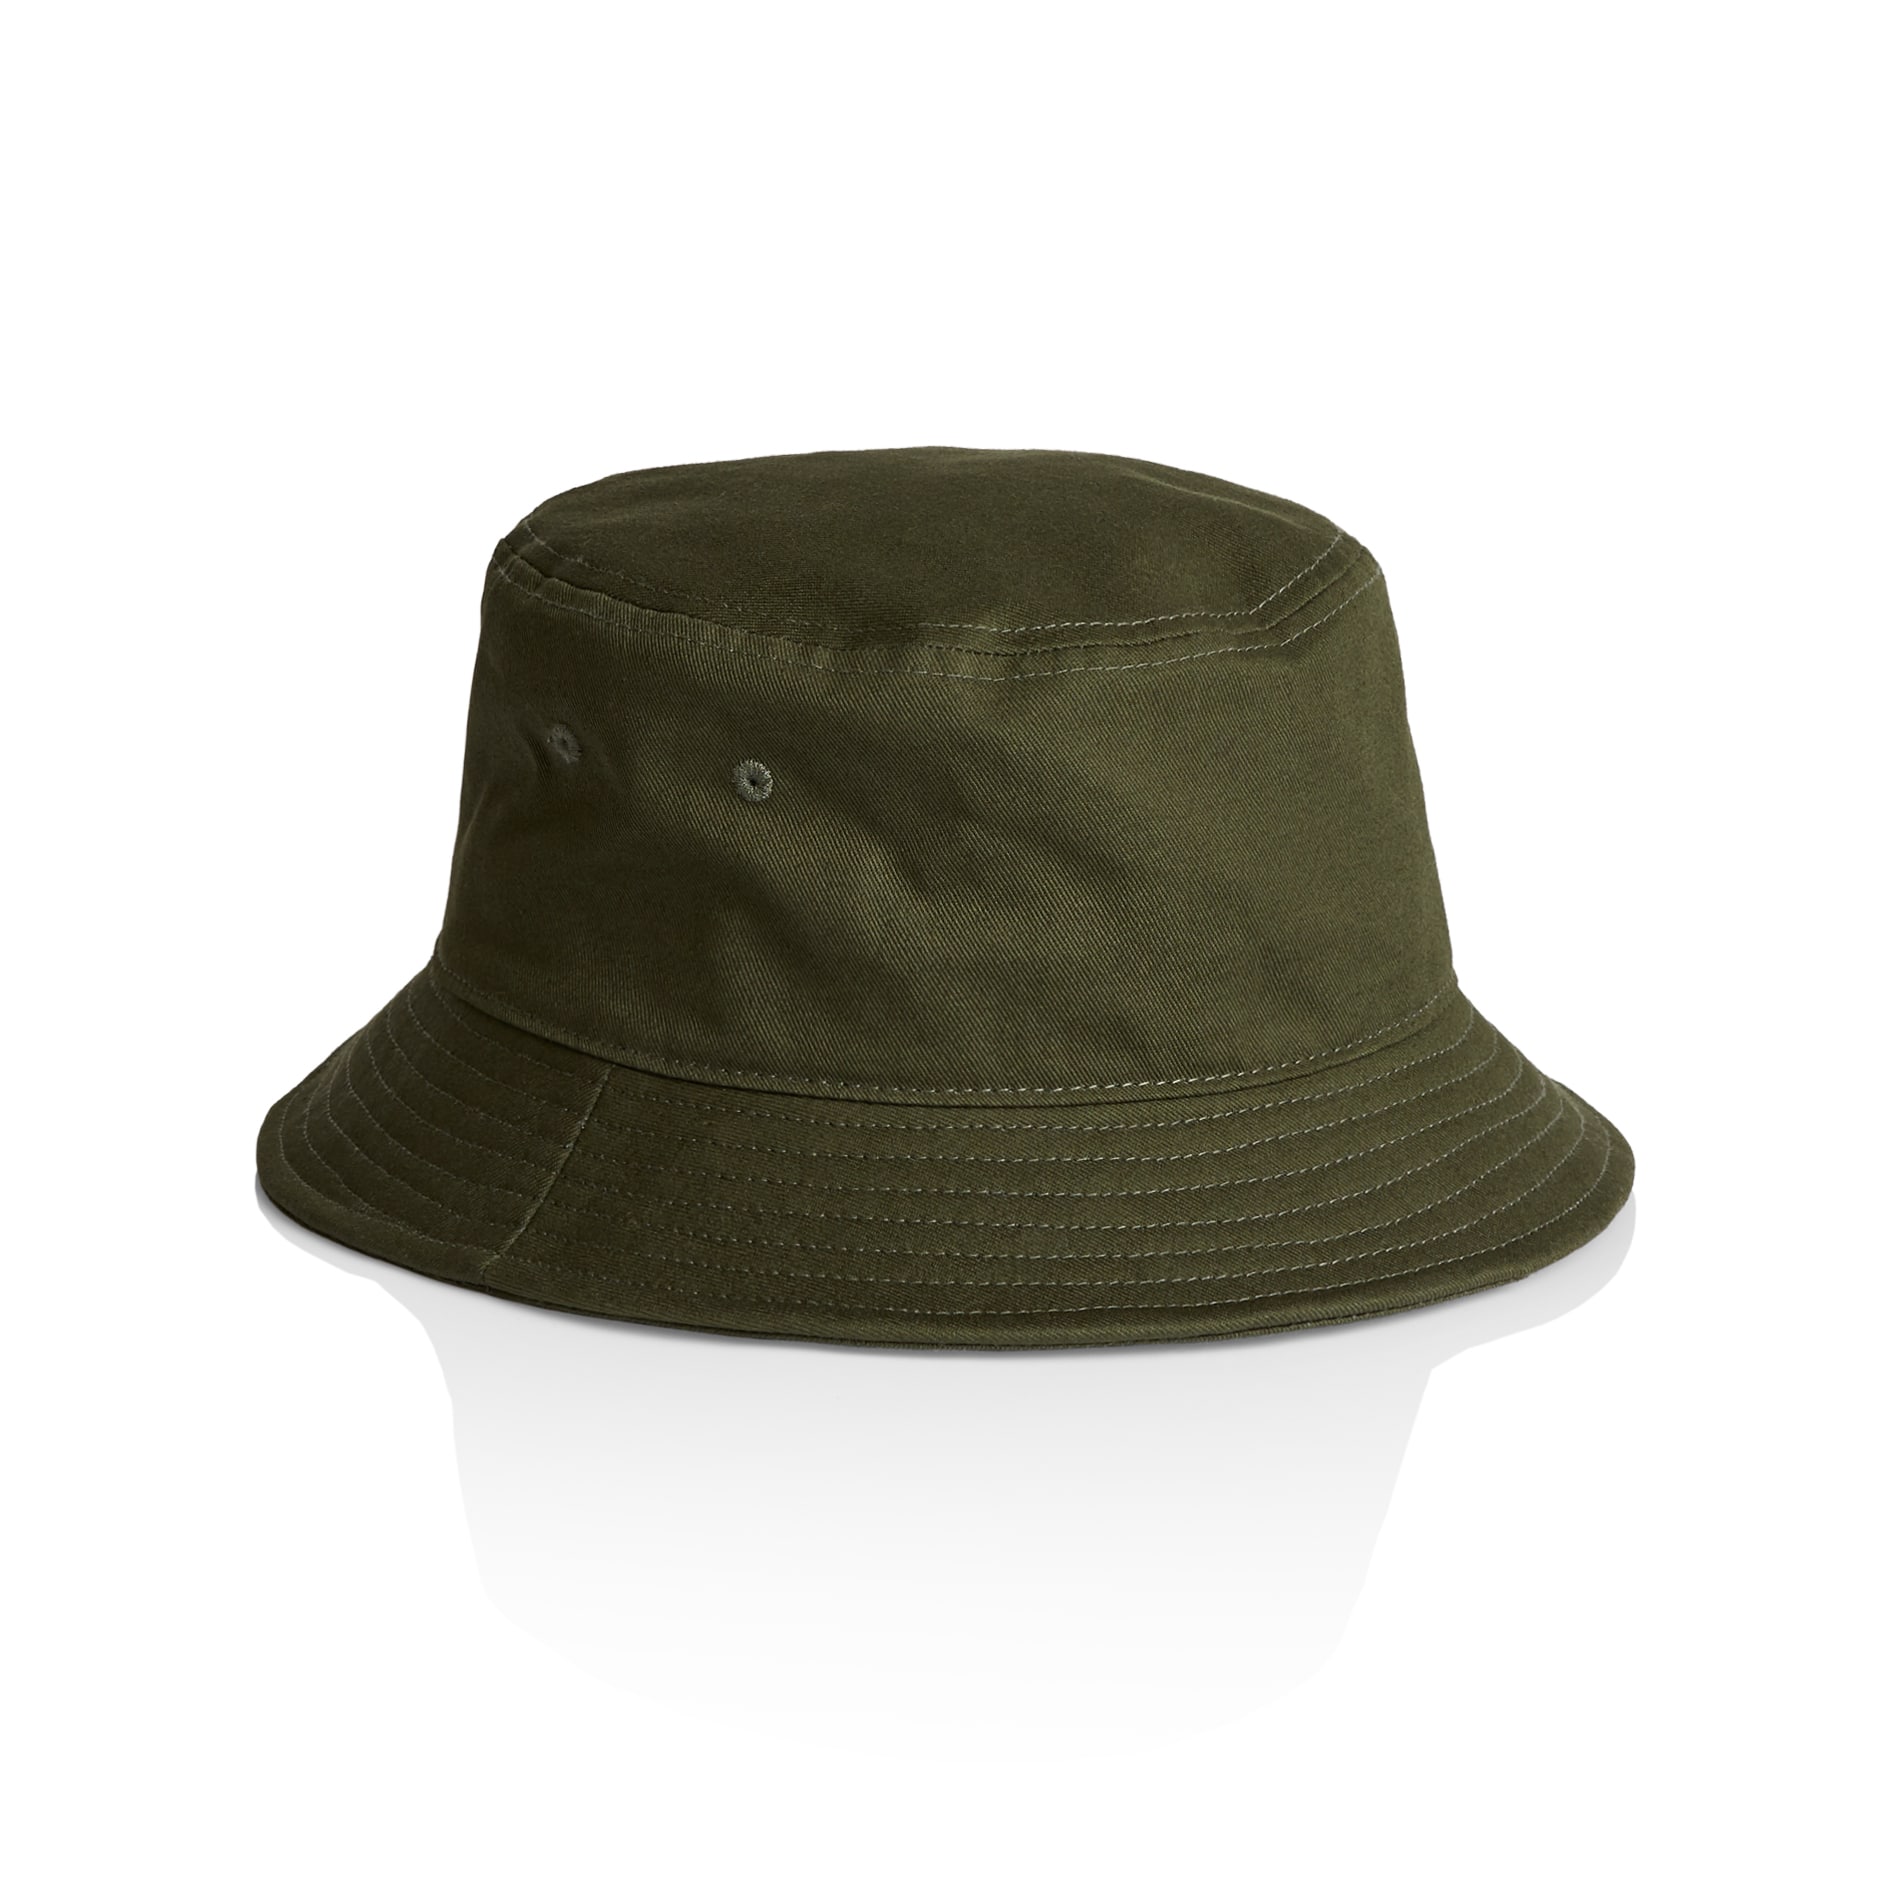 5 best caps to personalise - 1117 bucket hat army